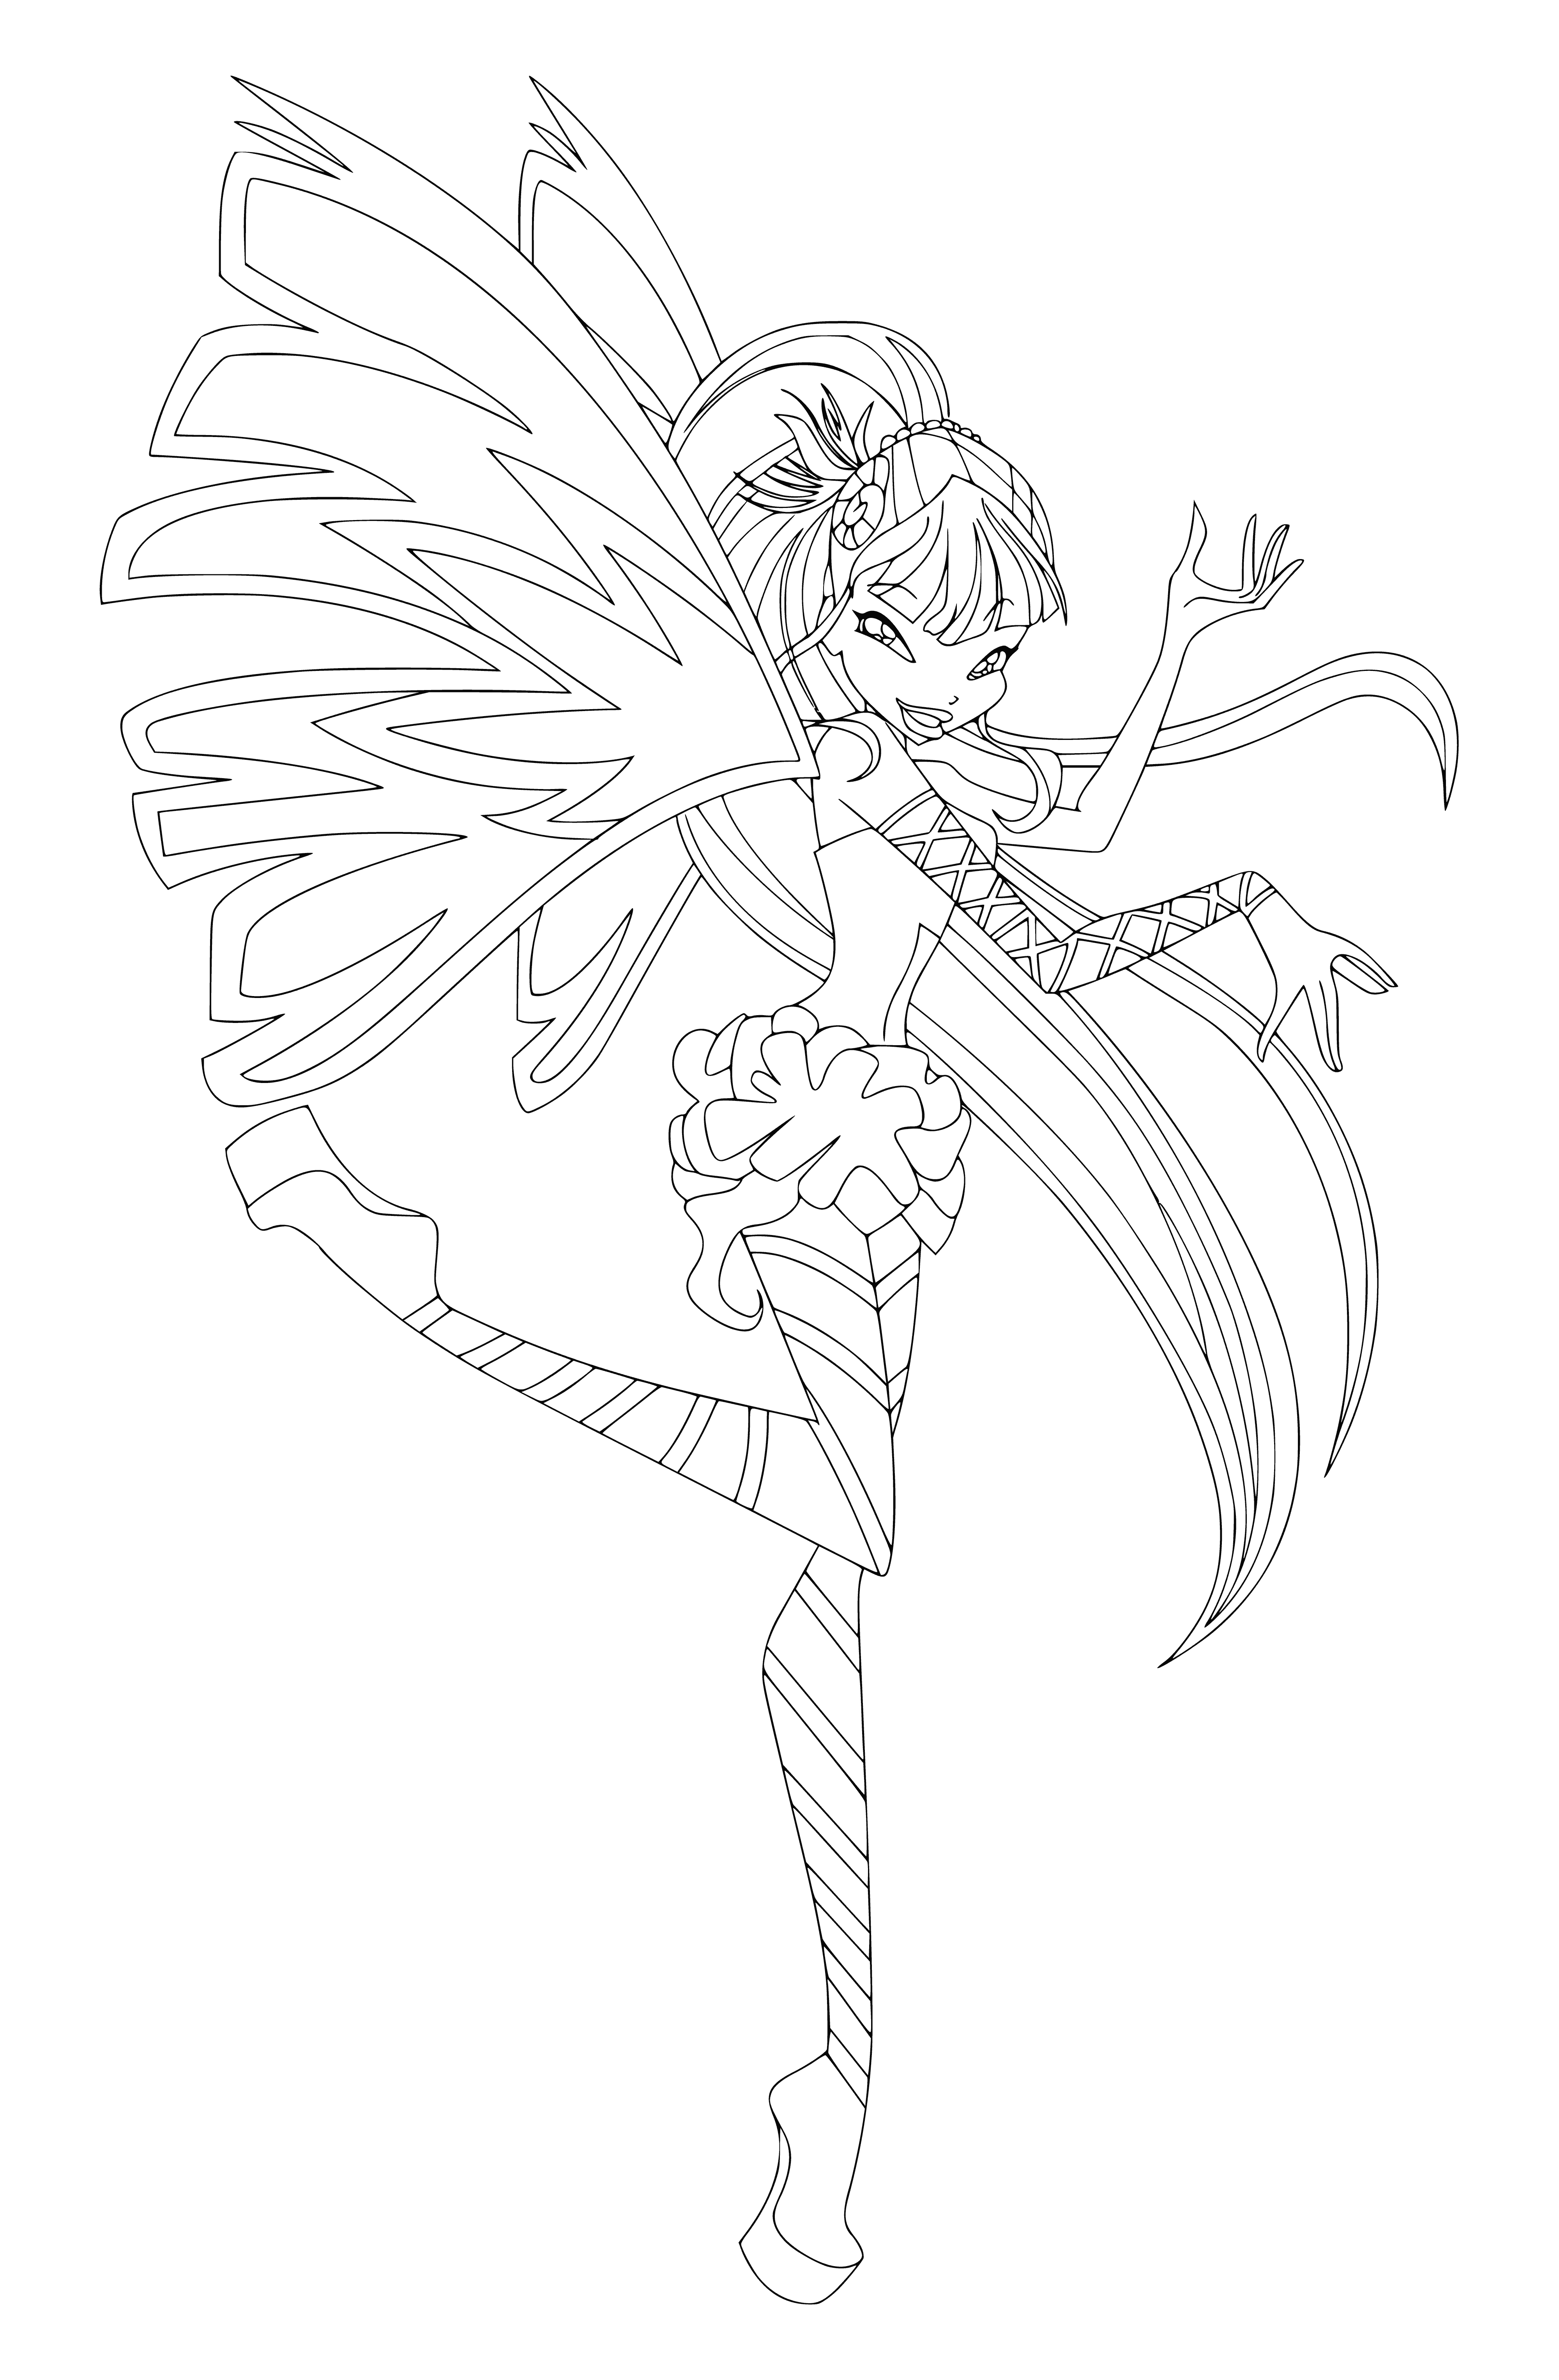 coloring page: Beautiful woman with blonde hair and white dress wearing gold crown and holding gold staff with wings, ready to fulfill her destiny.